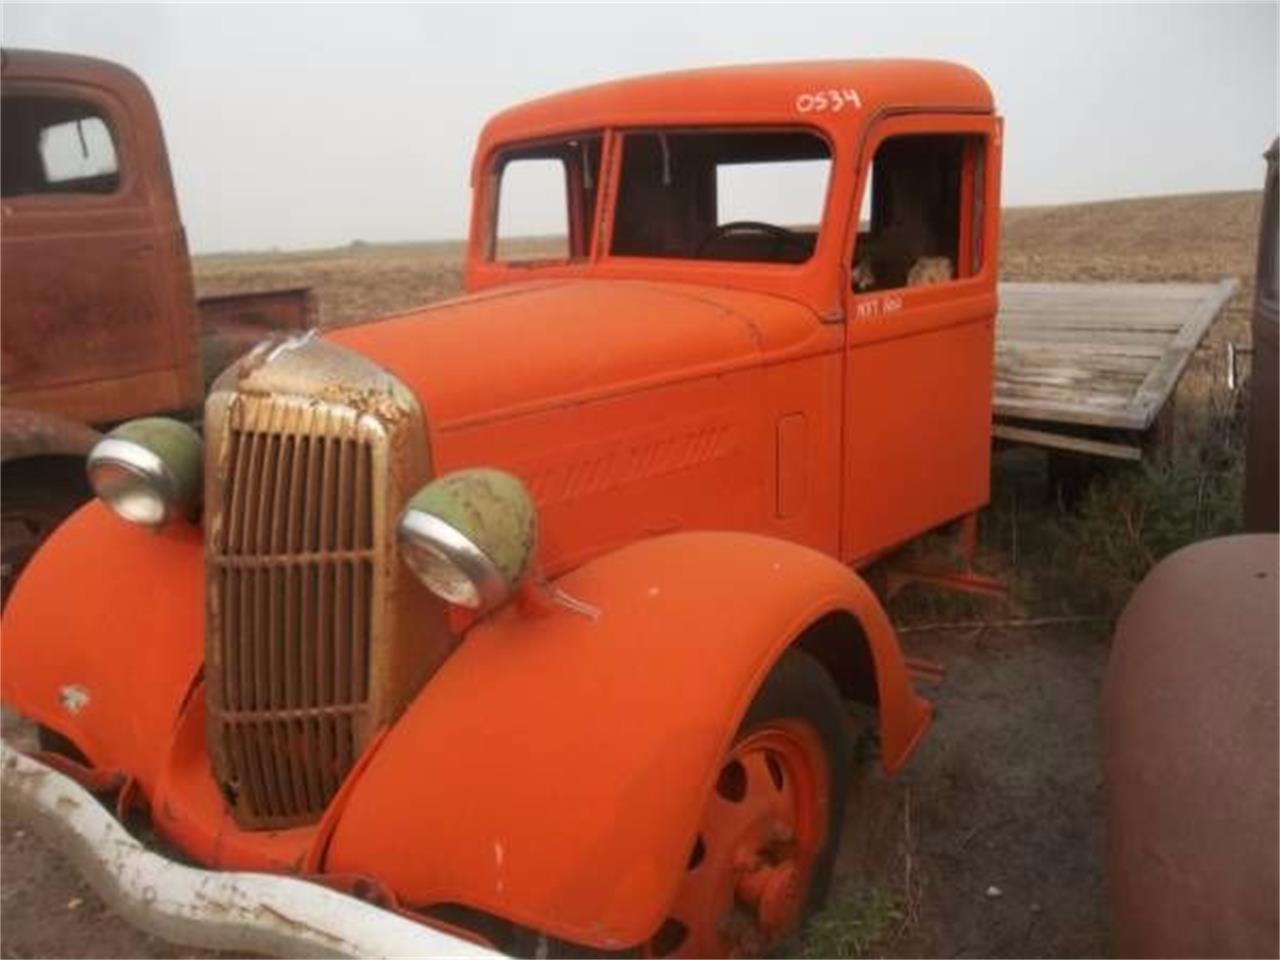 1937 REO  Truck  for Sale ClassicCars com CC 1121483